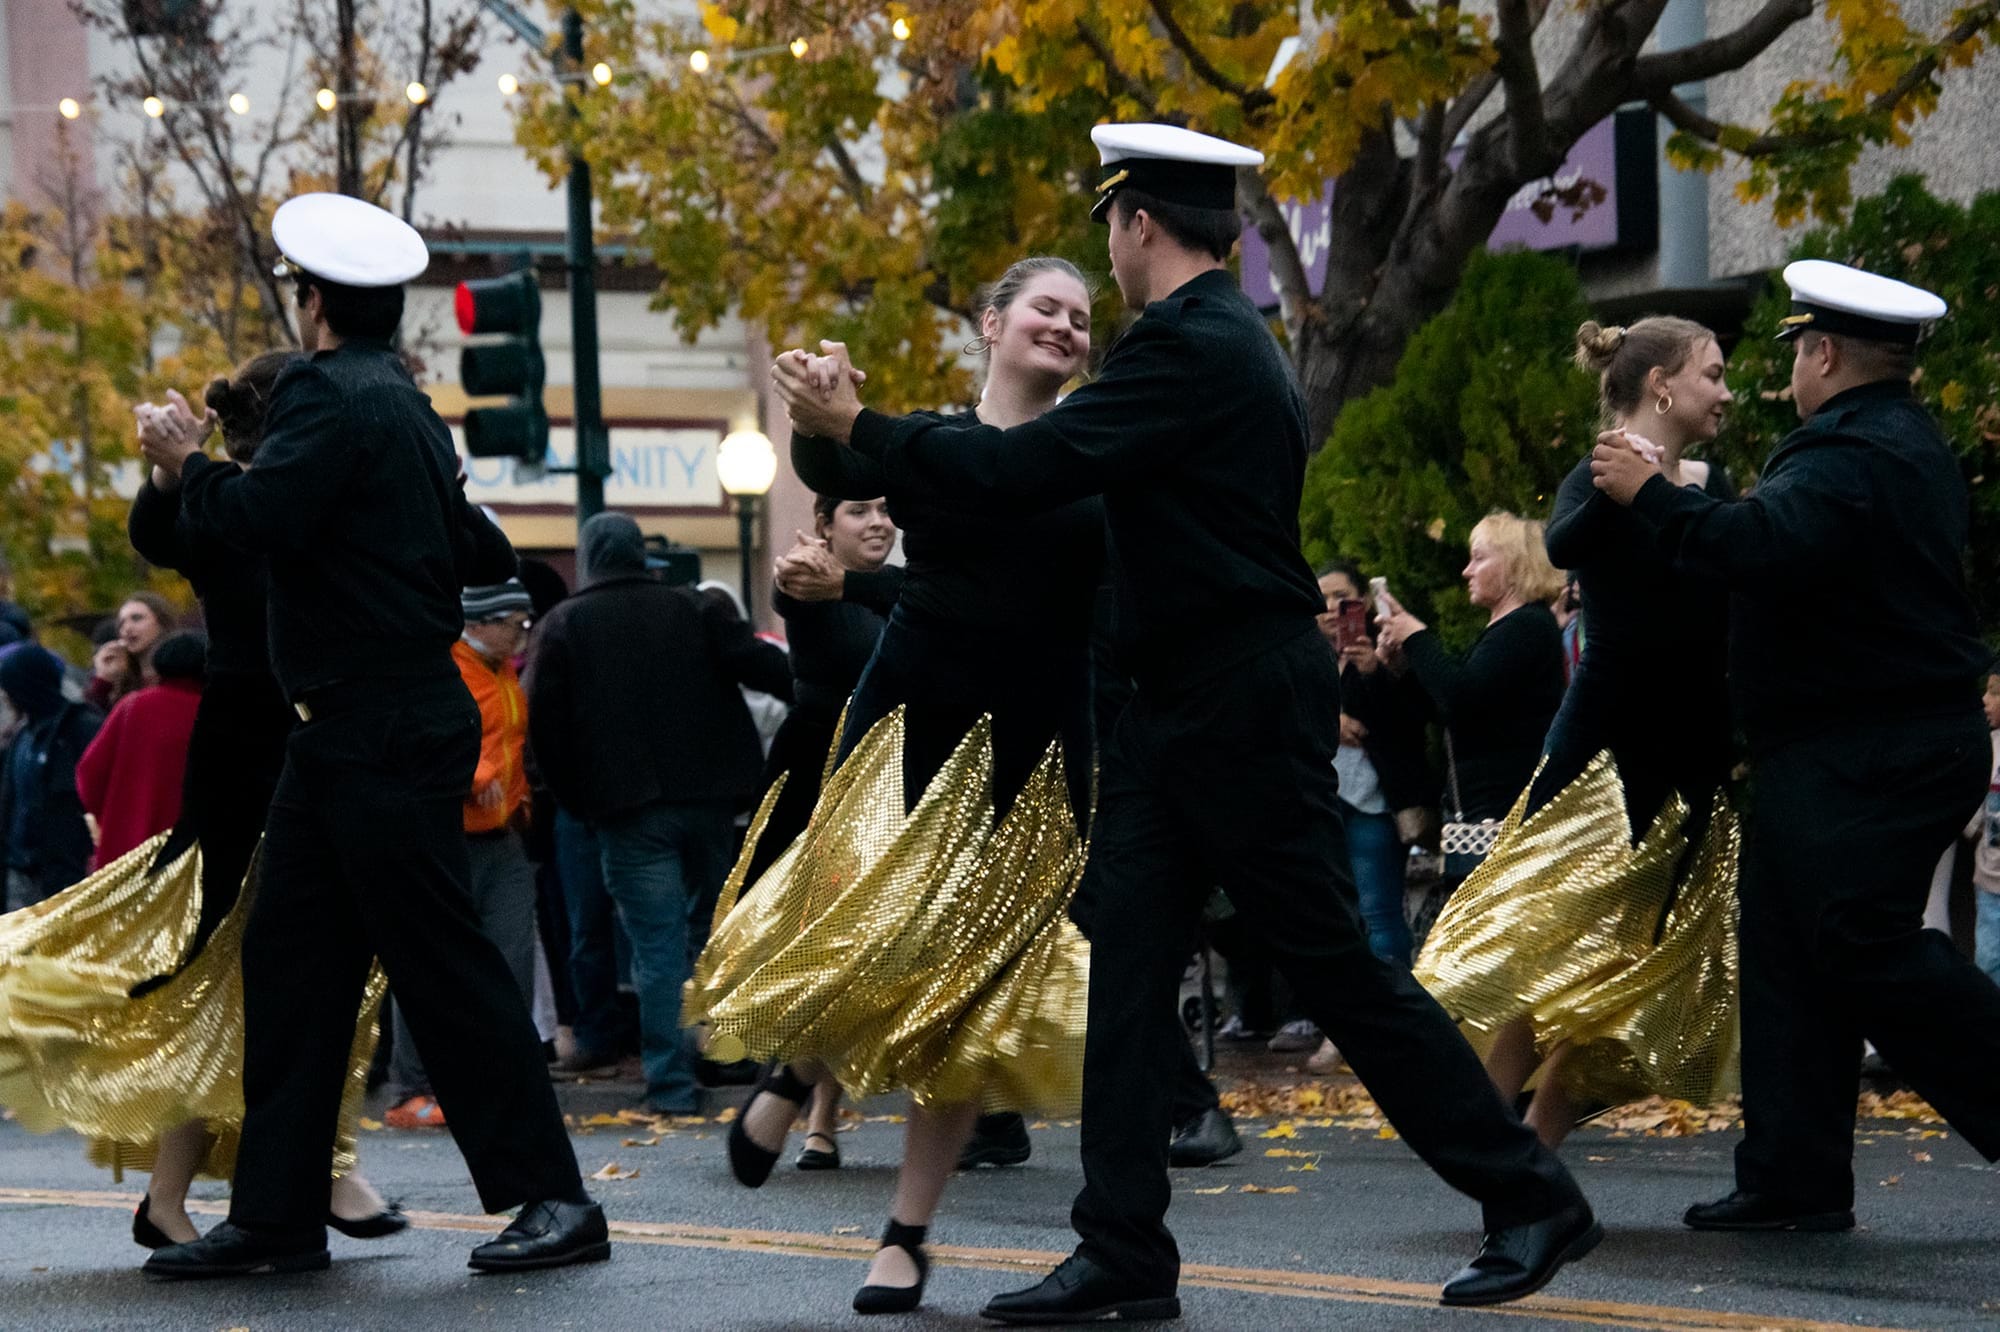 Cadets from California State University Maritime Academy partner danced in the streets during Vallejo's Mad Hatter parade.